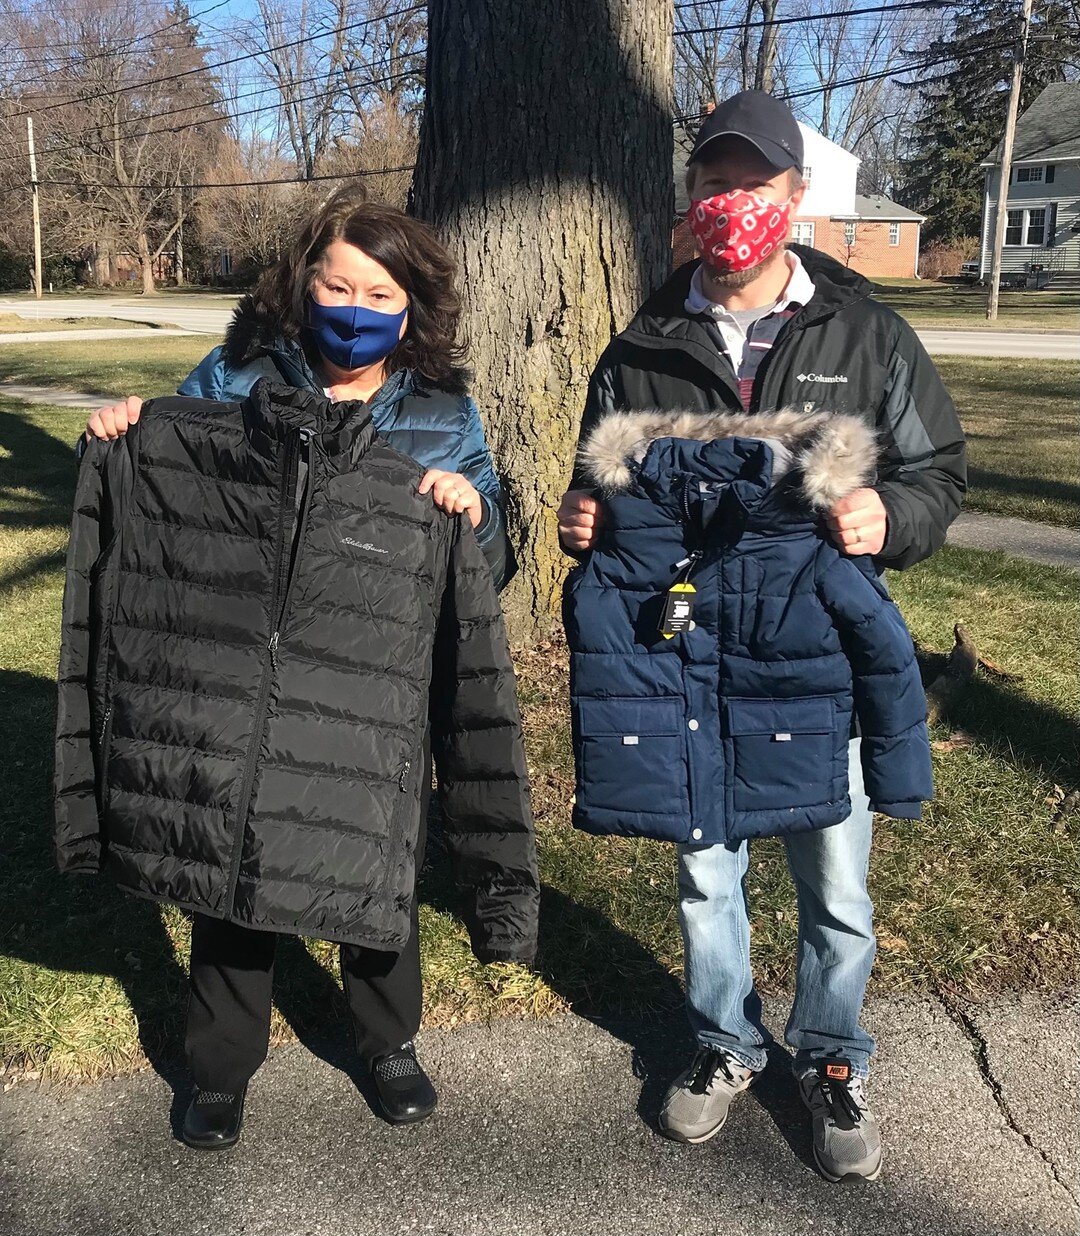 Paul is savvy shopper! This week he hunted down some beautiful winter coats for our kiddos, for a great price!

Thank you, Paul and Kristi, for the OVER THIRTY new warm and cozy coats!

🥰